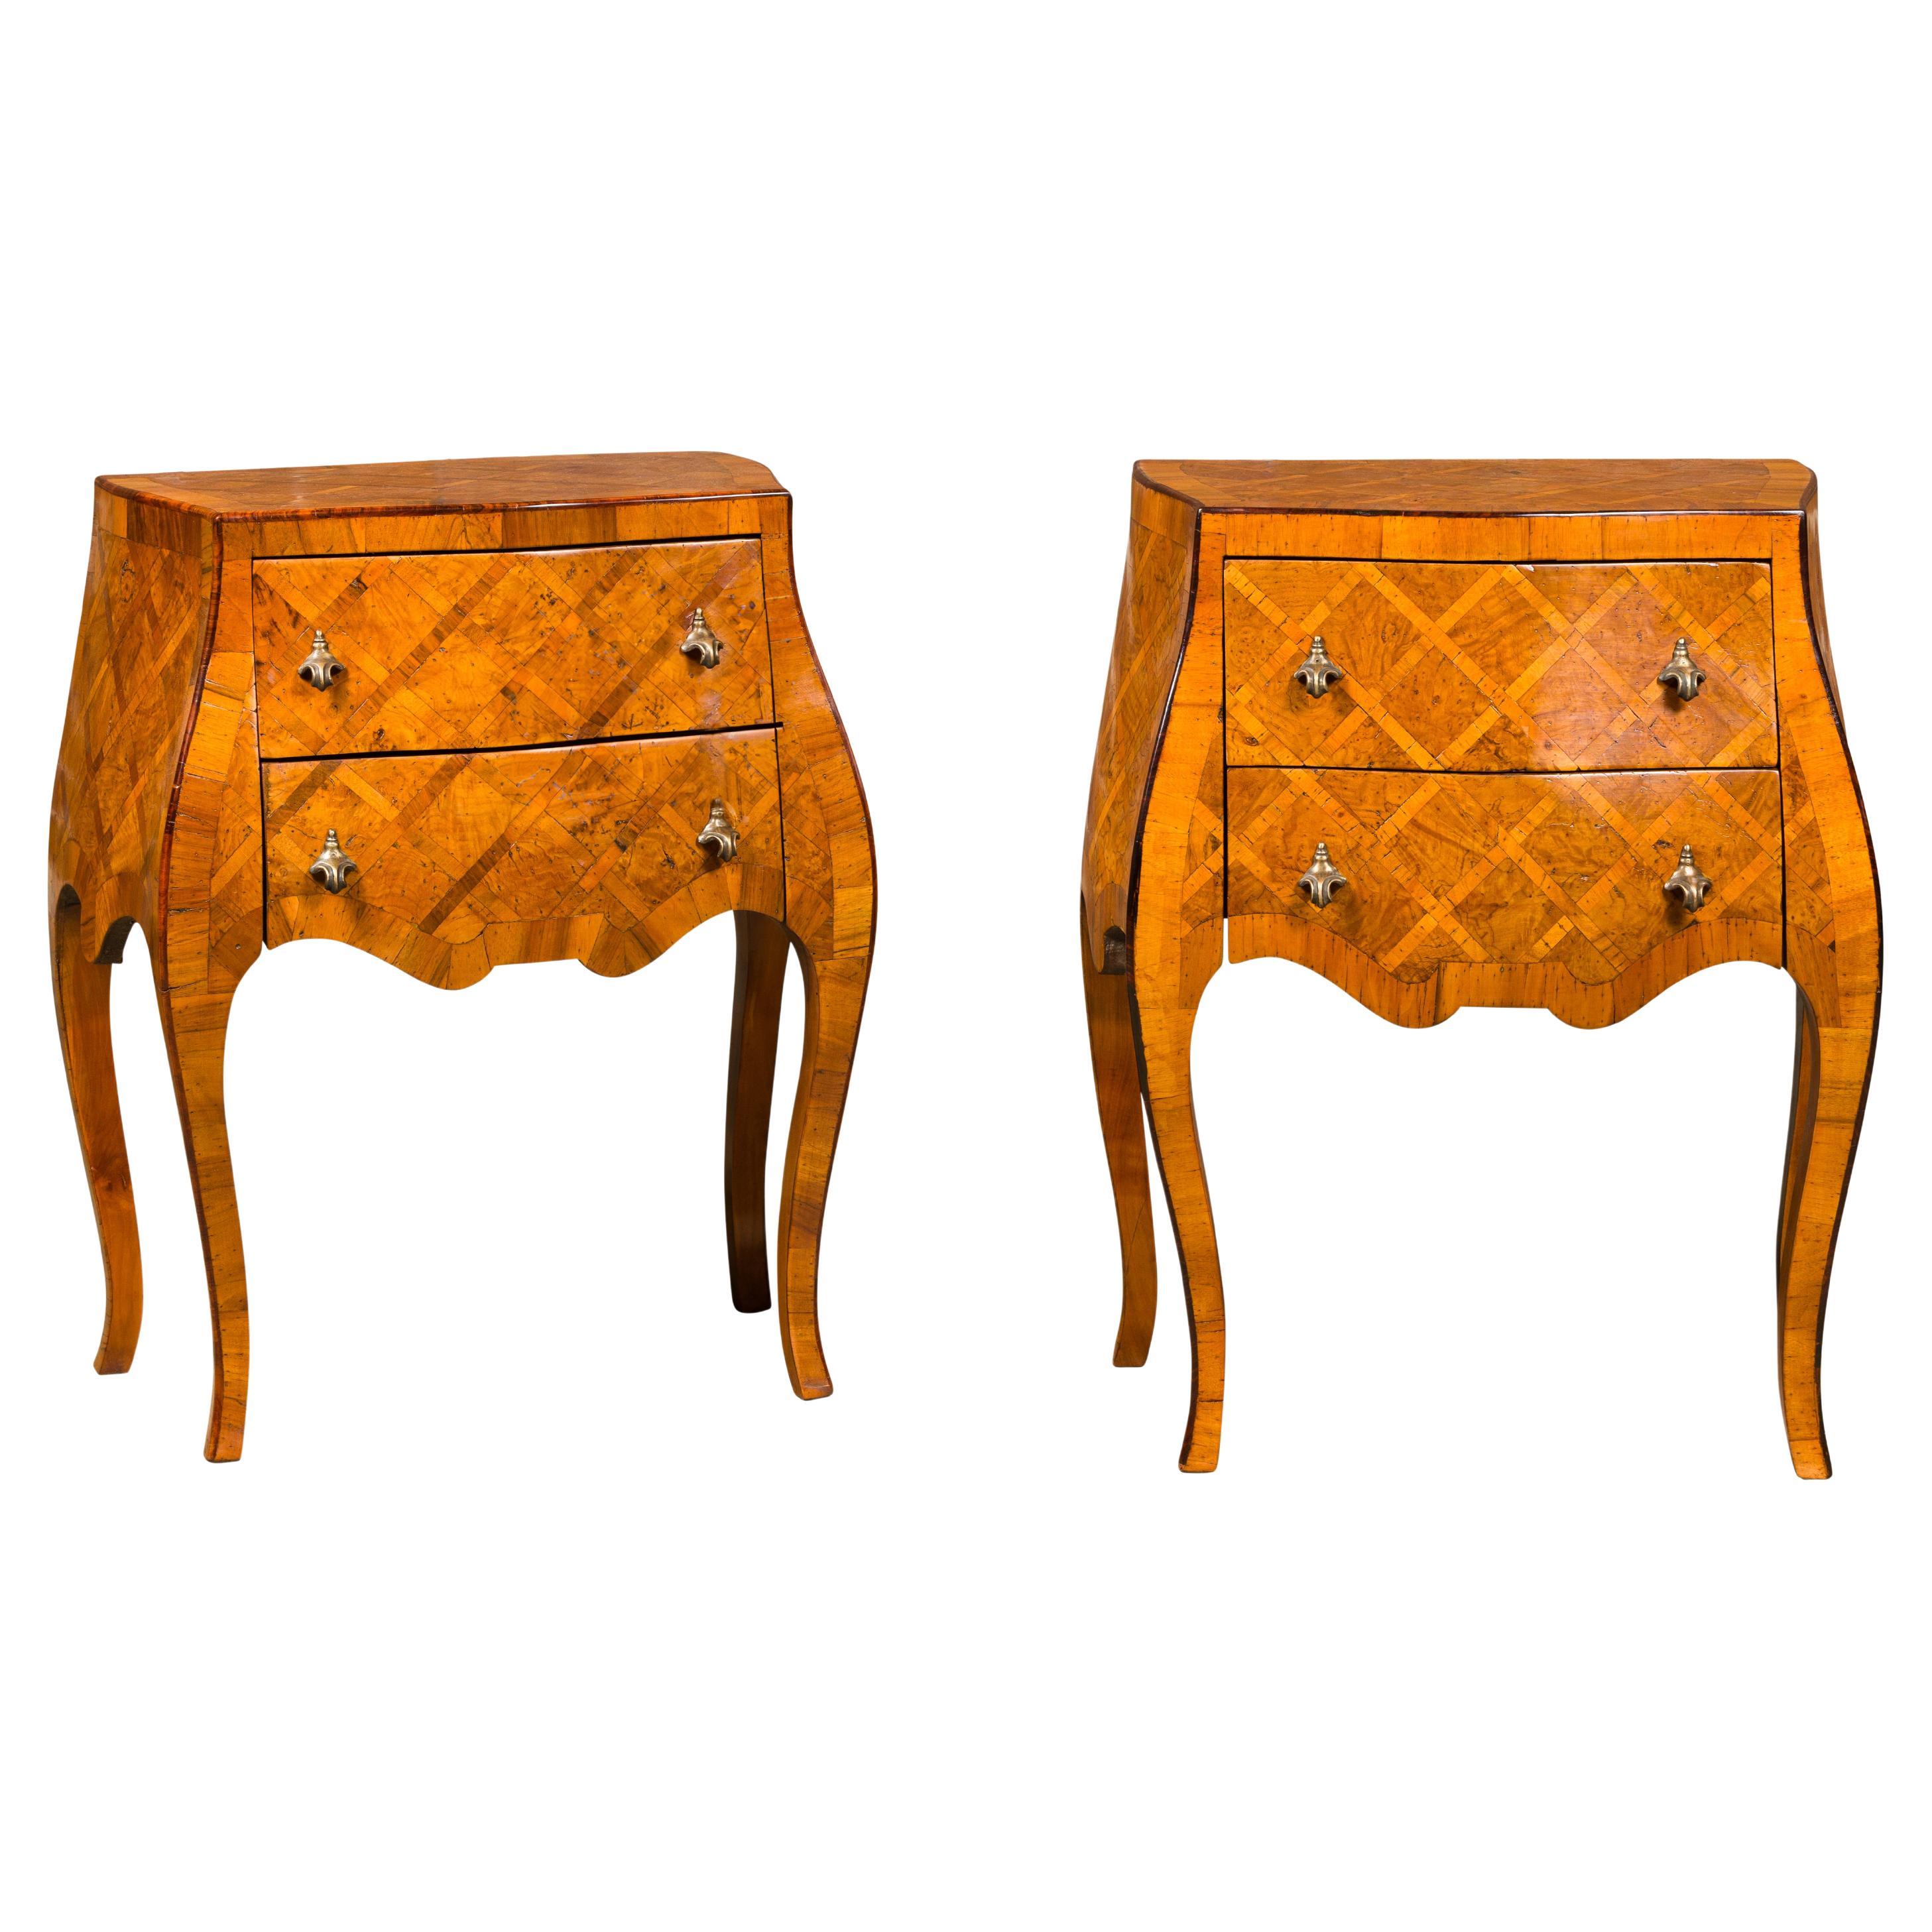 Italian Rococo Style Burl Wood Marquetry Bedside Chests with Cabriole Legs For Sale